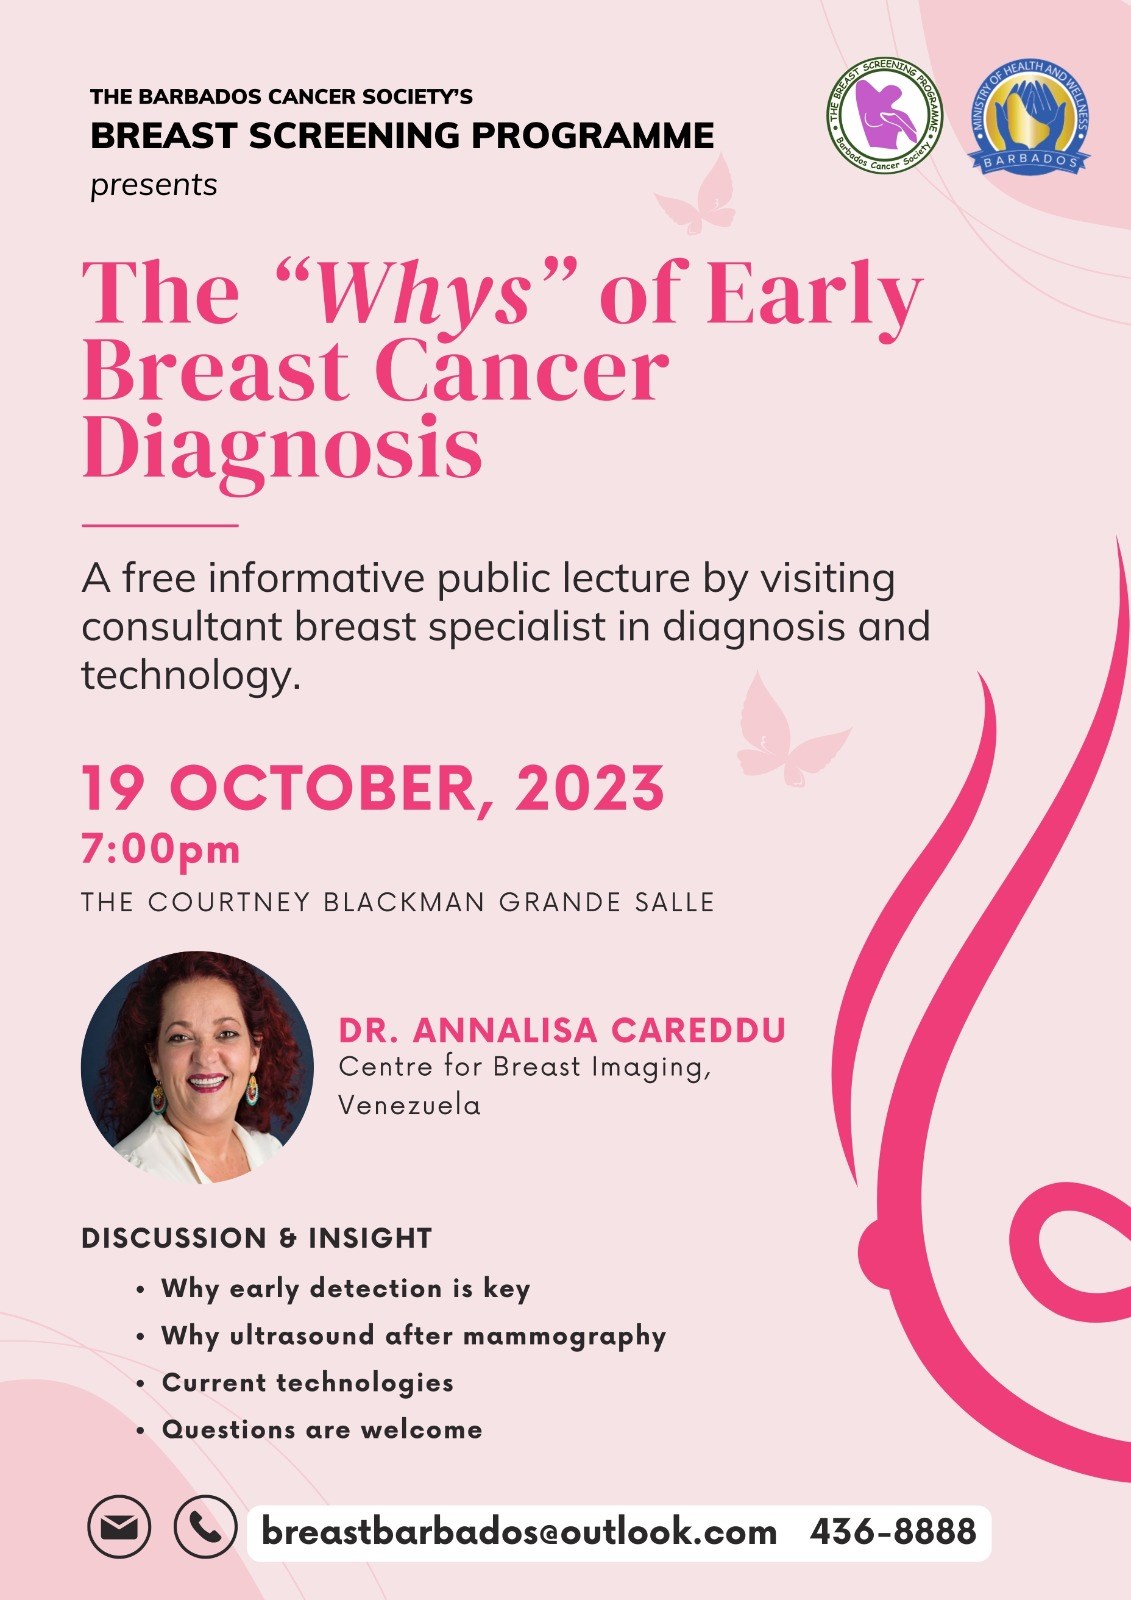 Public Lecture on The Why's of Early Breast Cancer Diagnosis